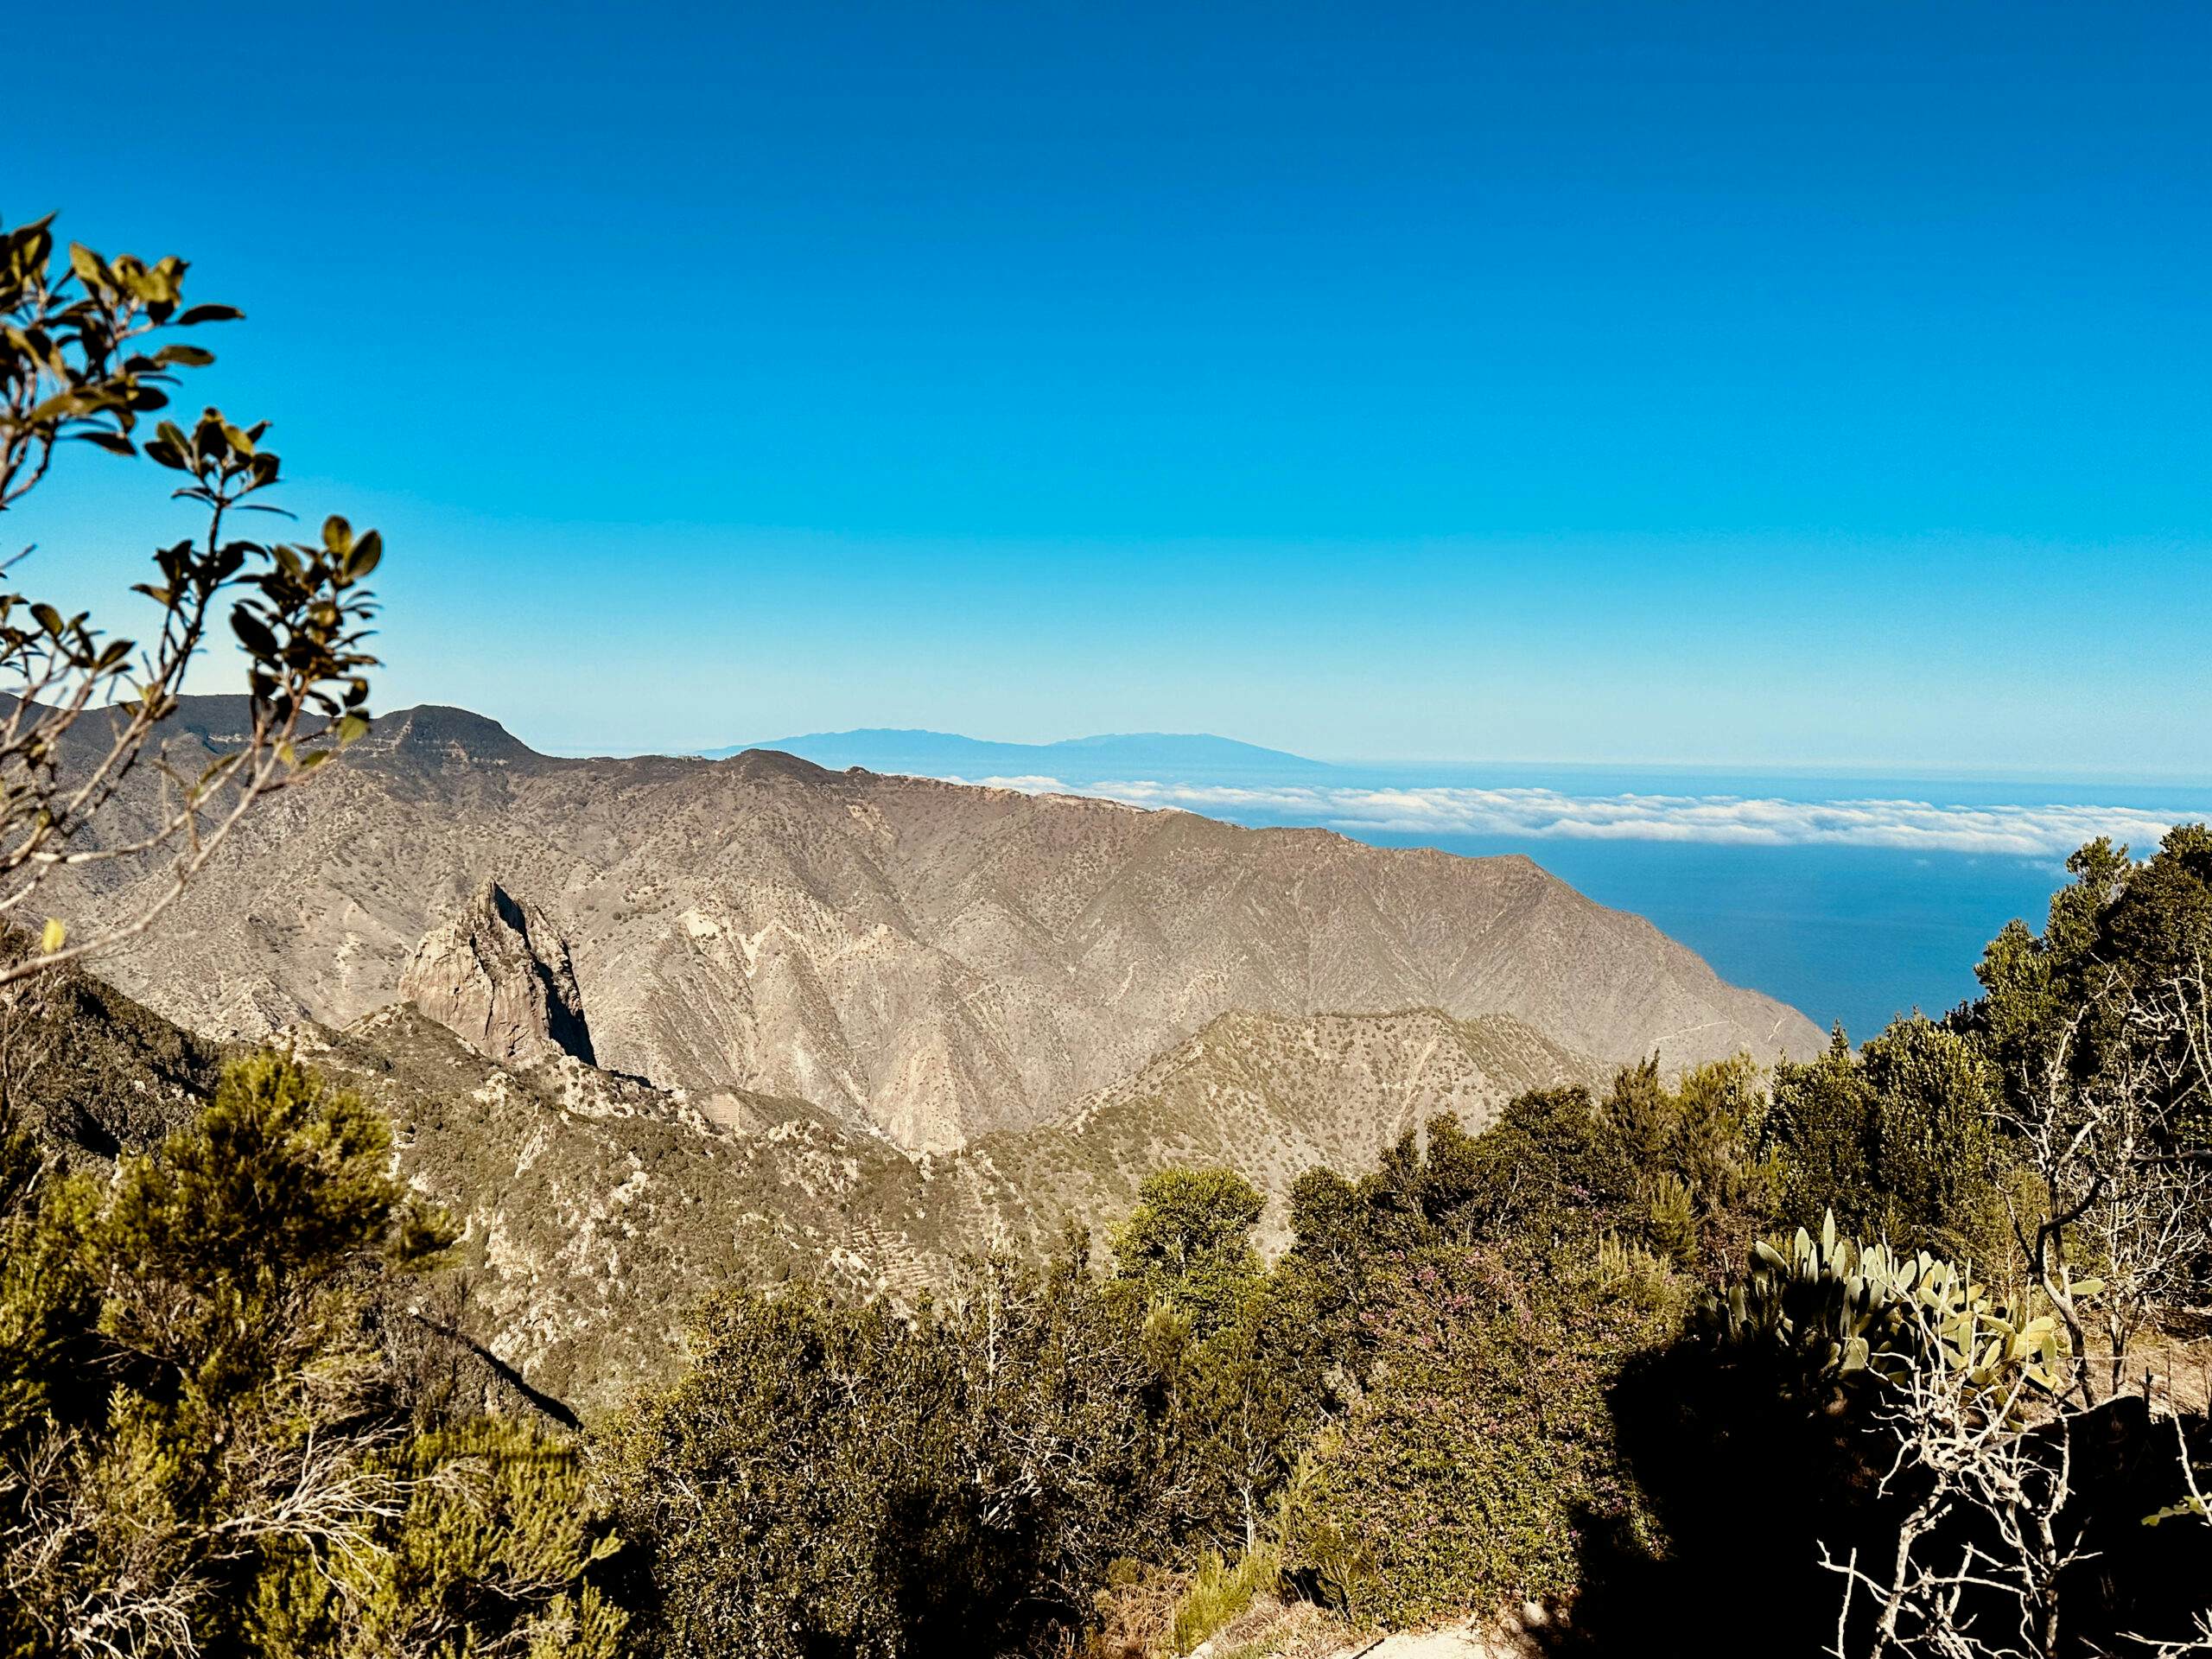 View back from the hiking trail to the neighbouring island of La Palma and Roque Cano